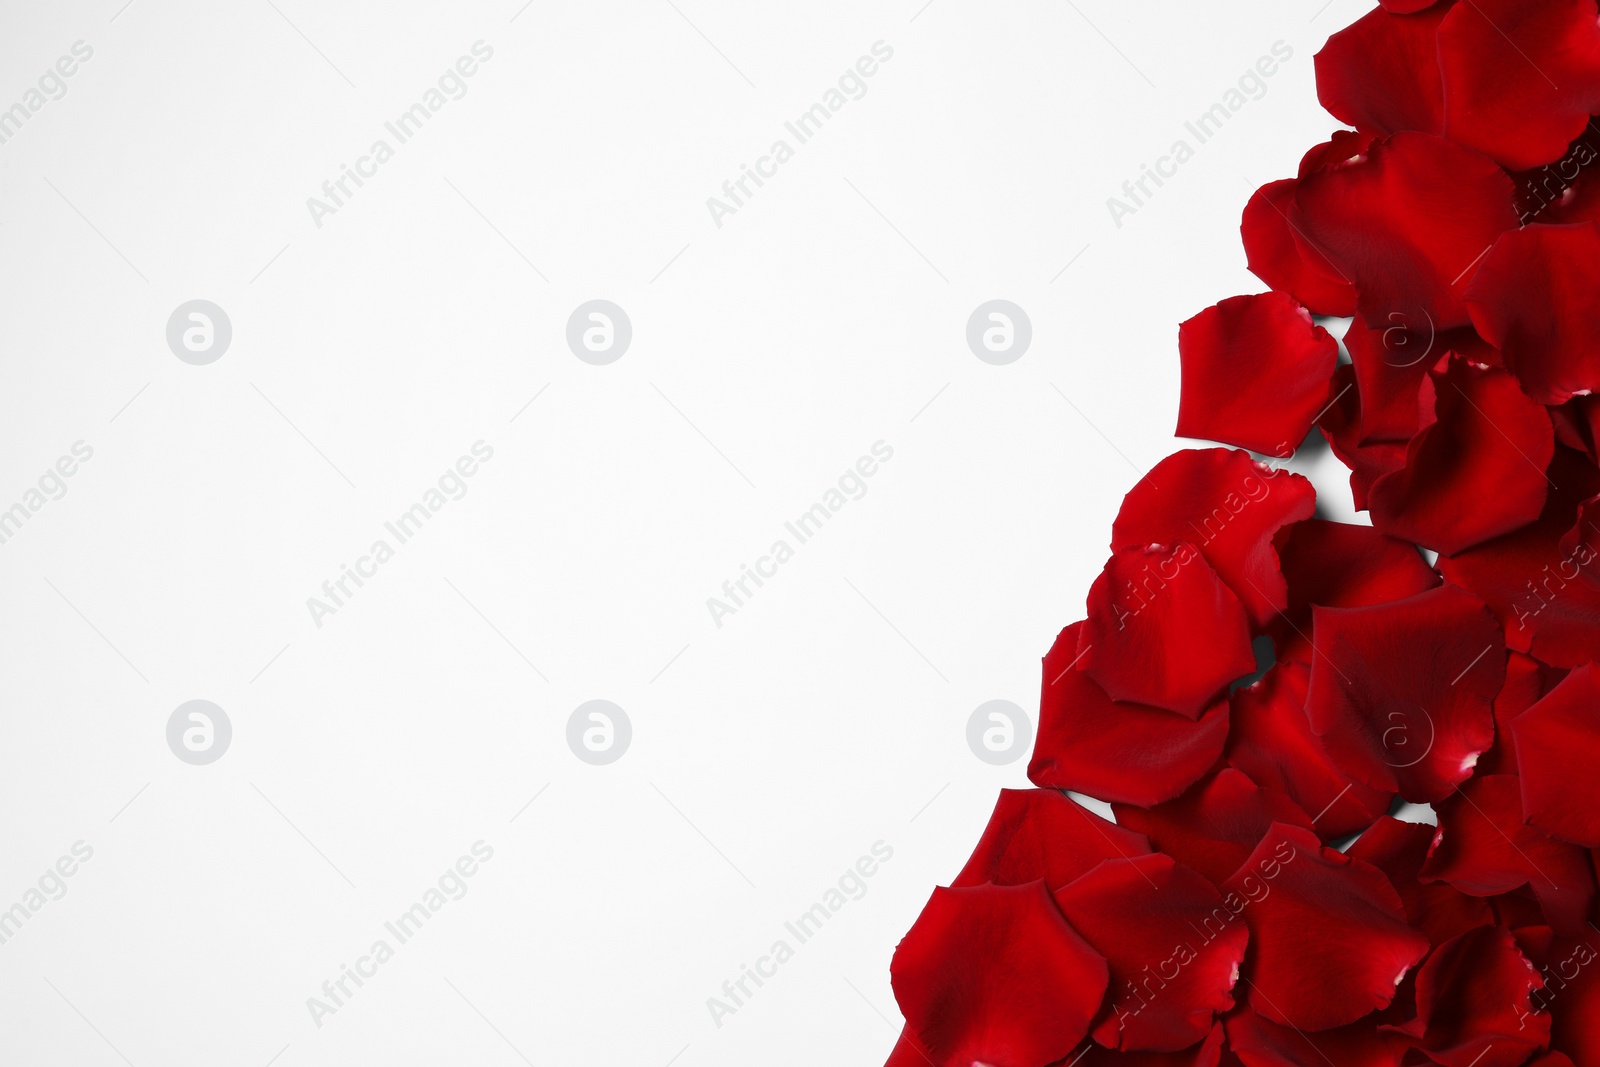 Photo of Beautiful red rose petals on white background, top view